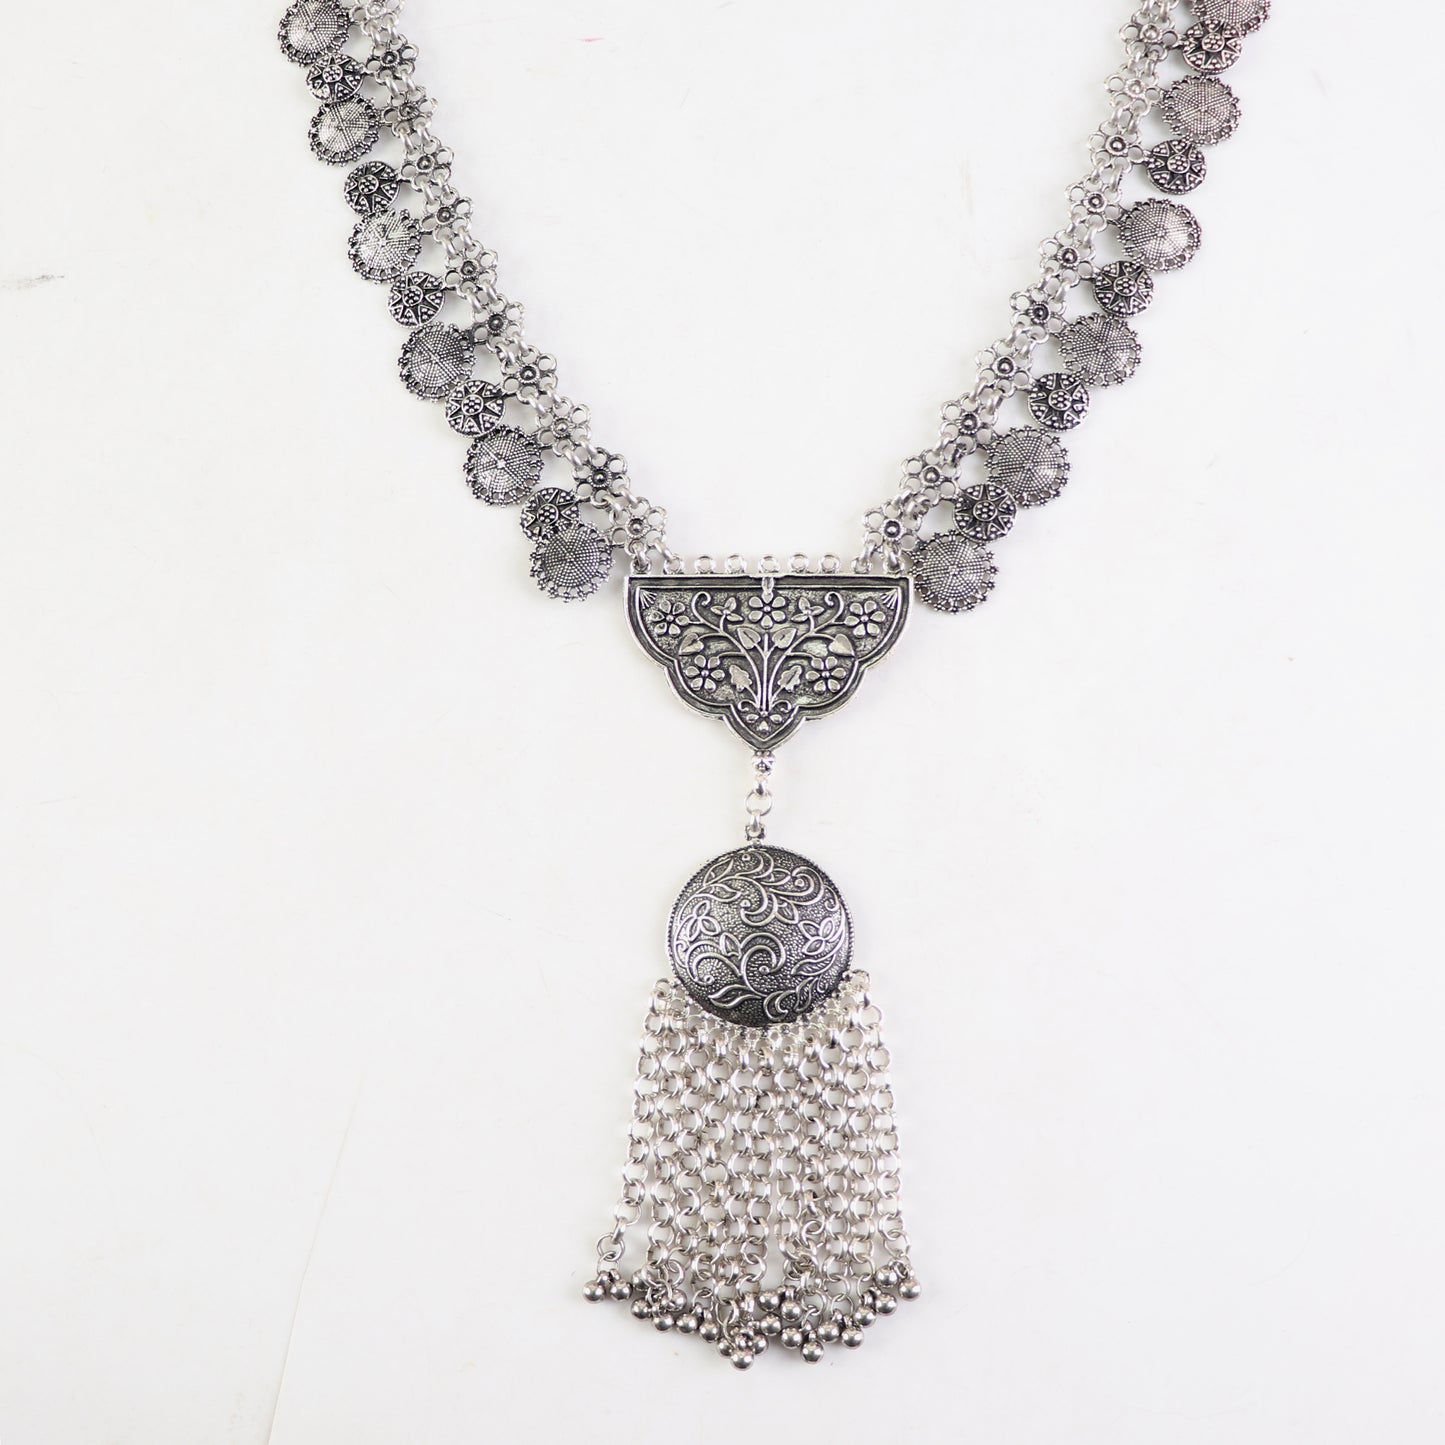 Necklace,Turkish Princess Necklace in Silver - Cippele Multi Store